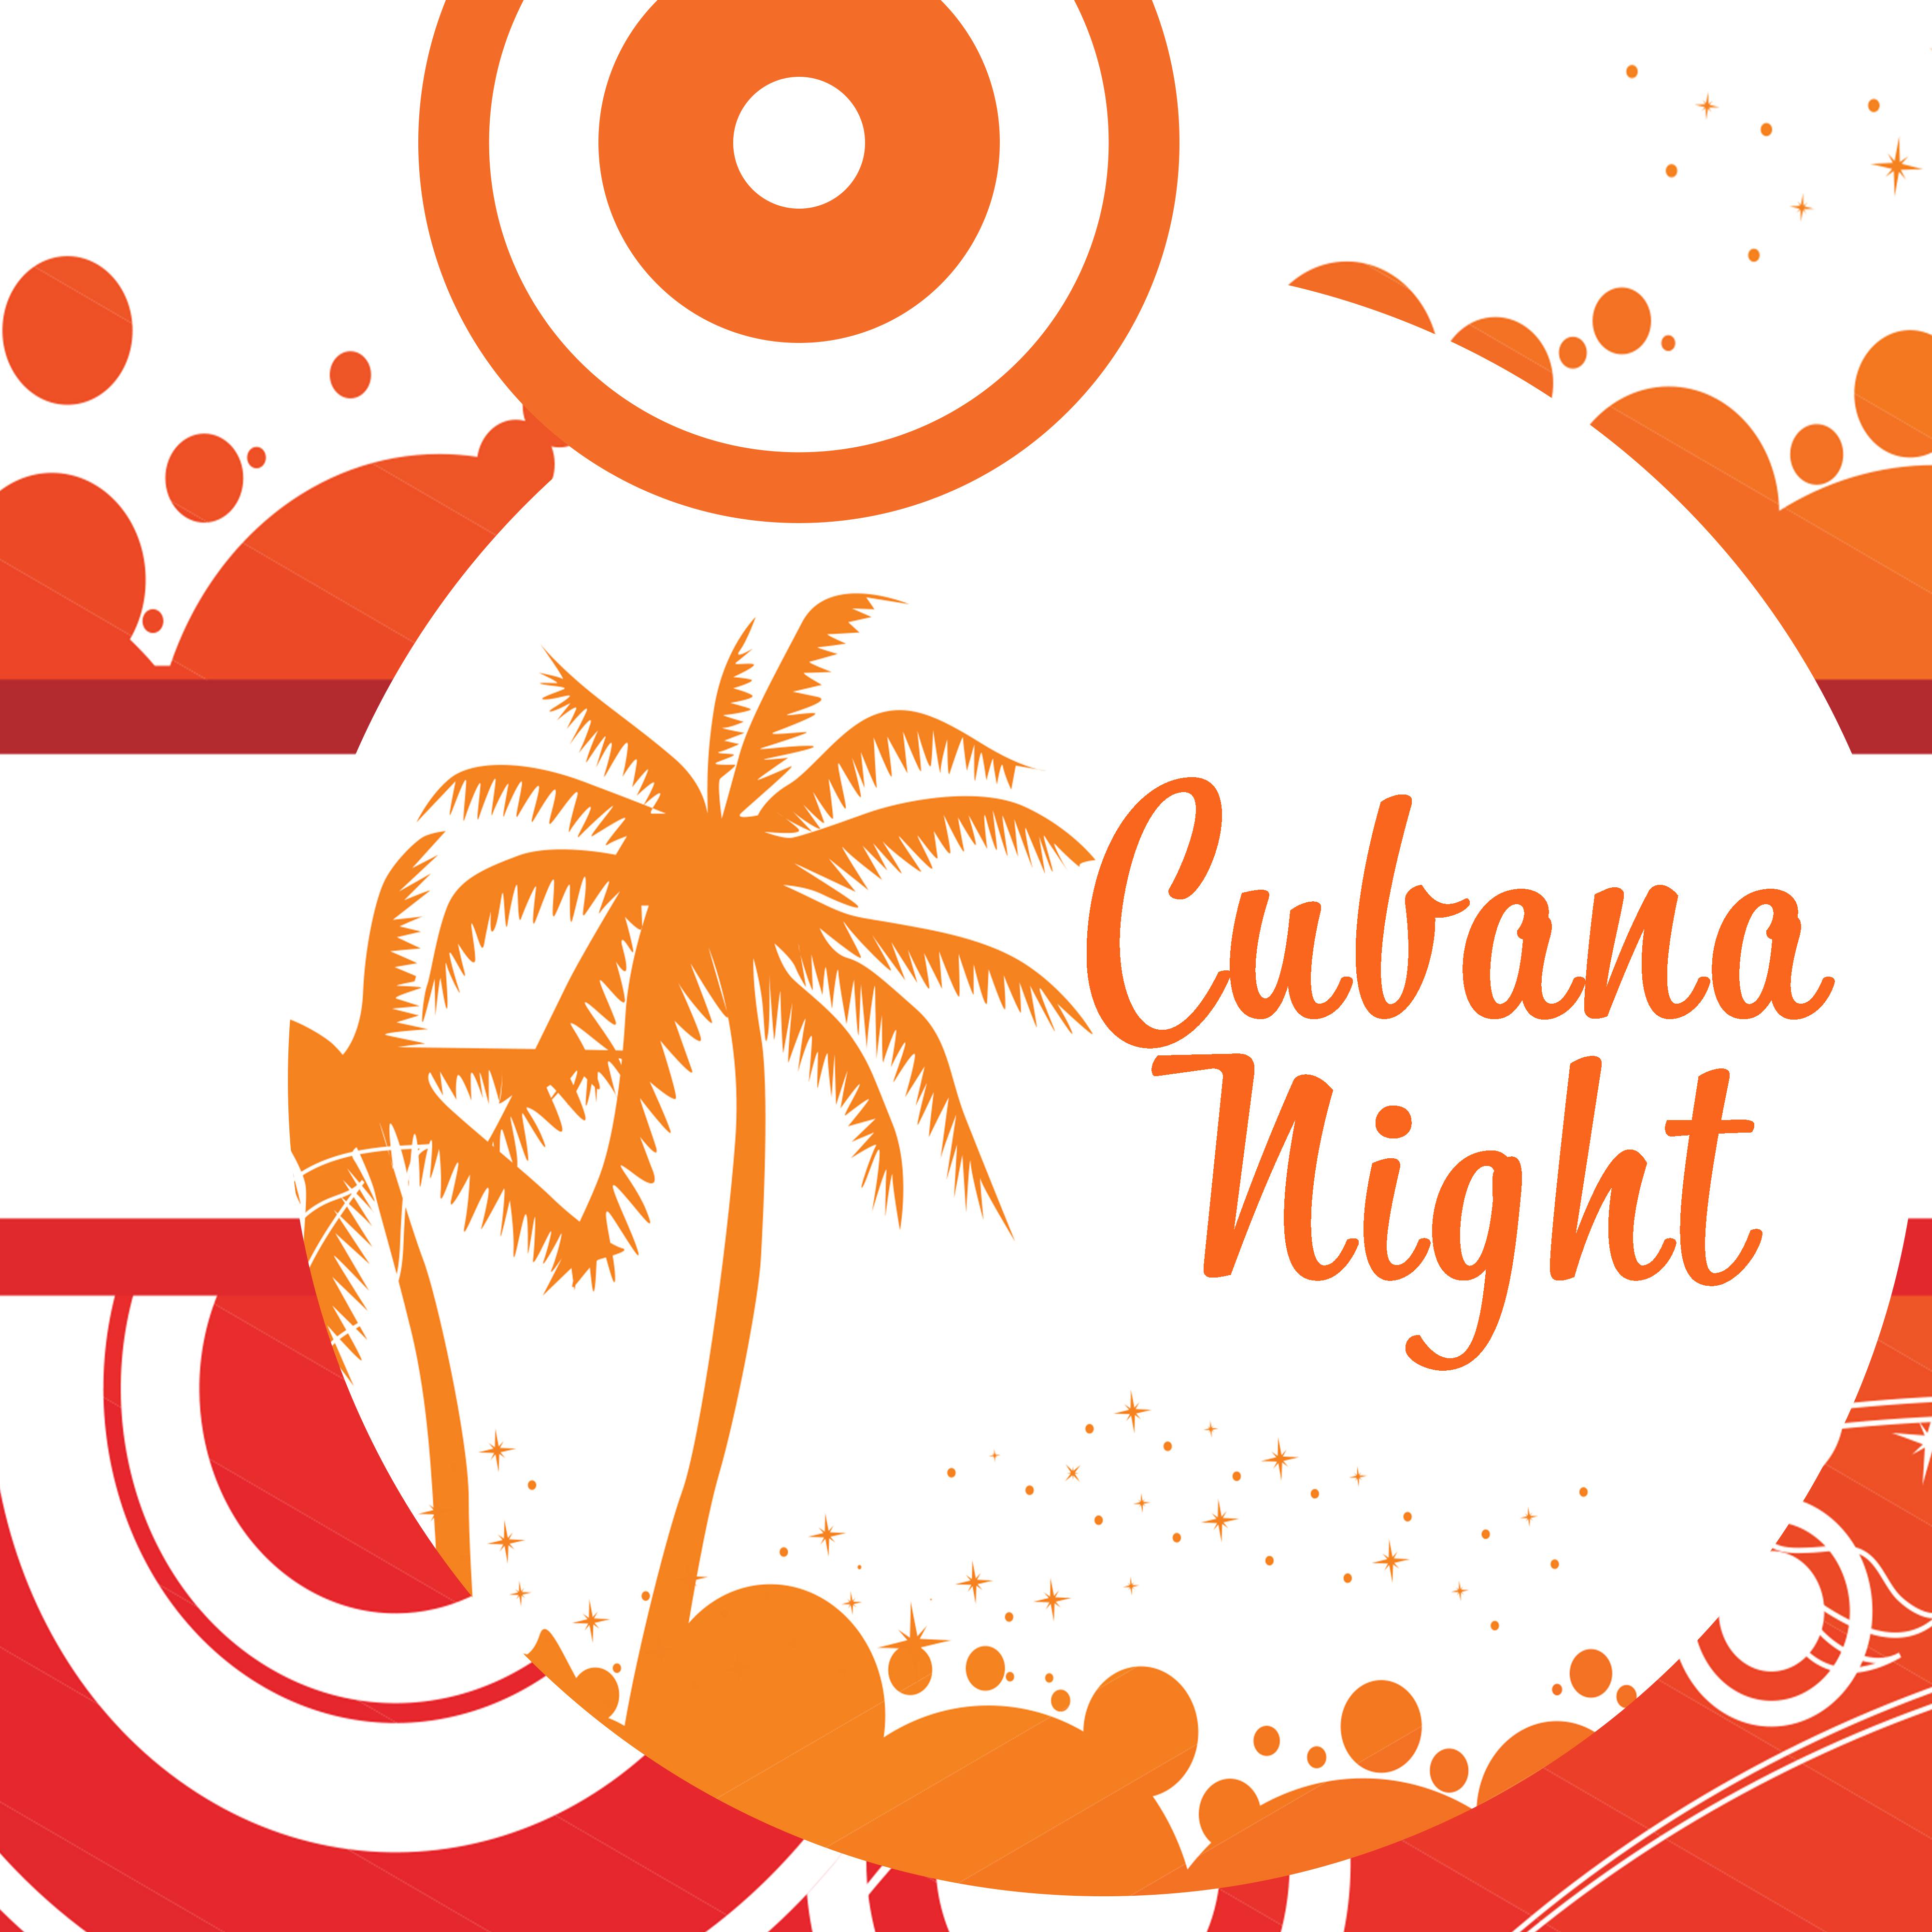 Cubana Night  Summer Hits 2017, Dance Party, Bar Chill Out, Tropical Party, Disco on the Beach, Sexy Vibes